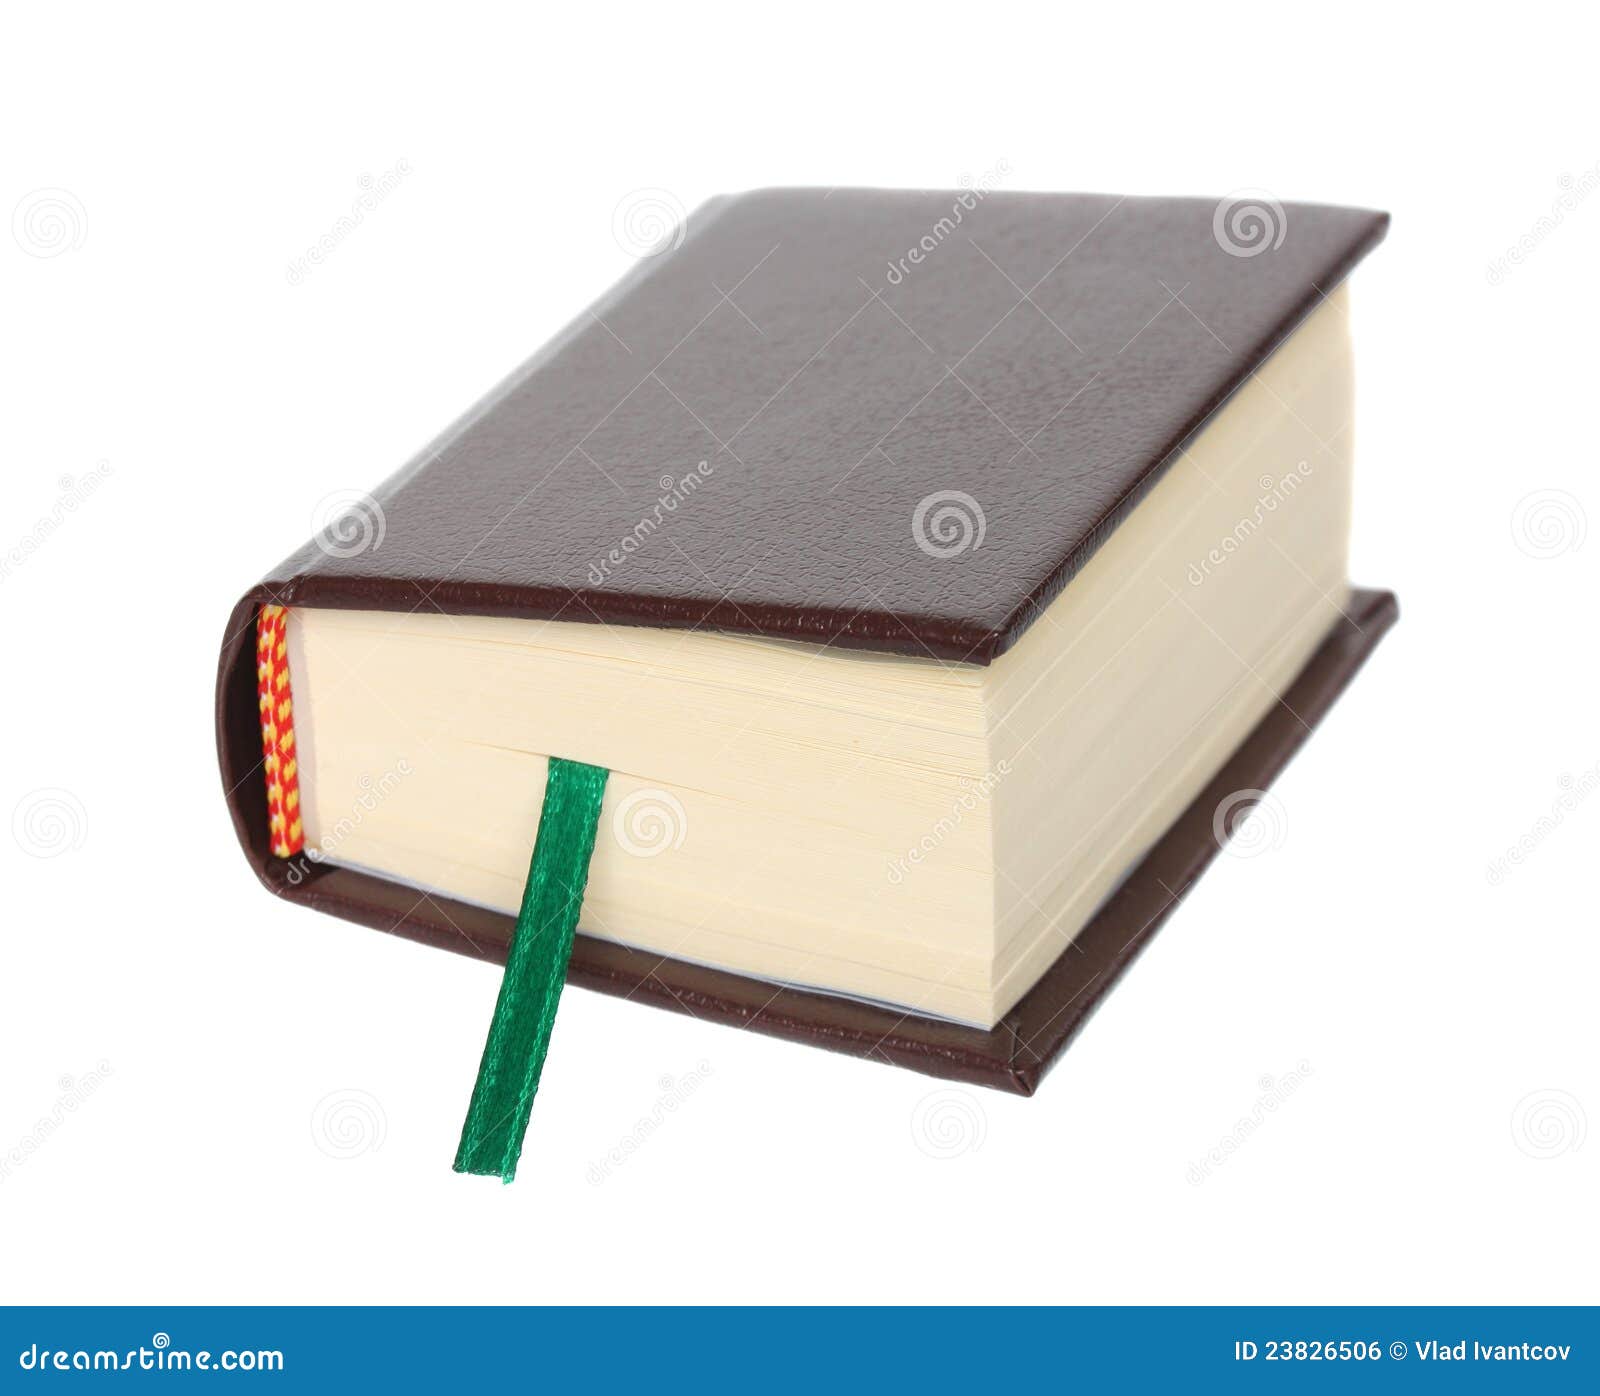 clipart thick book - photo #45